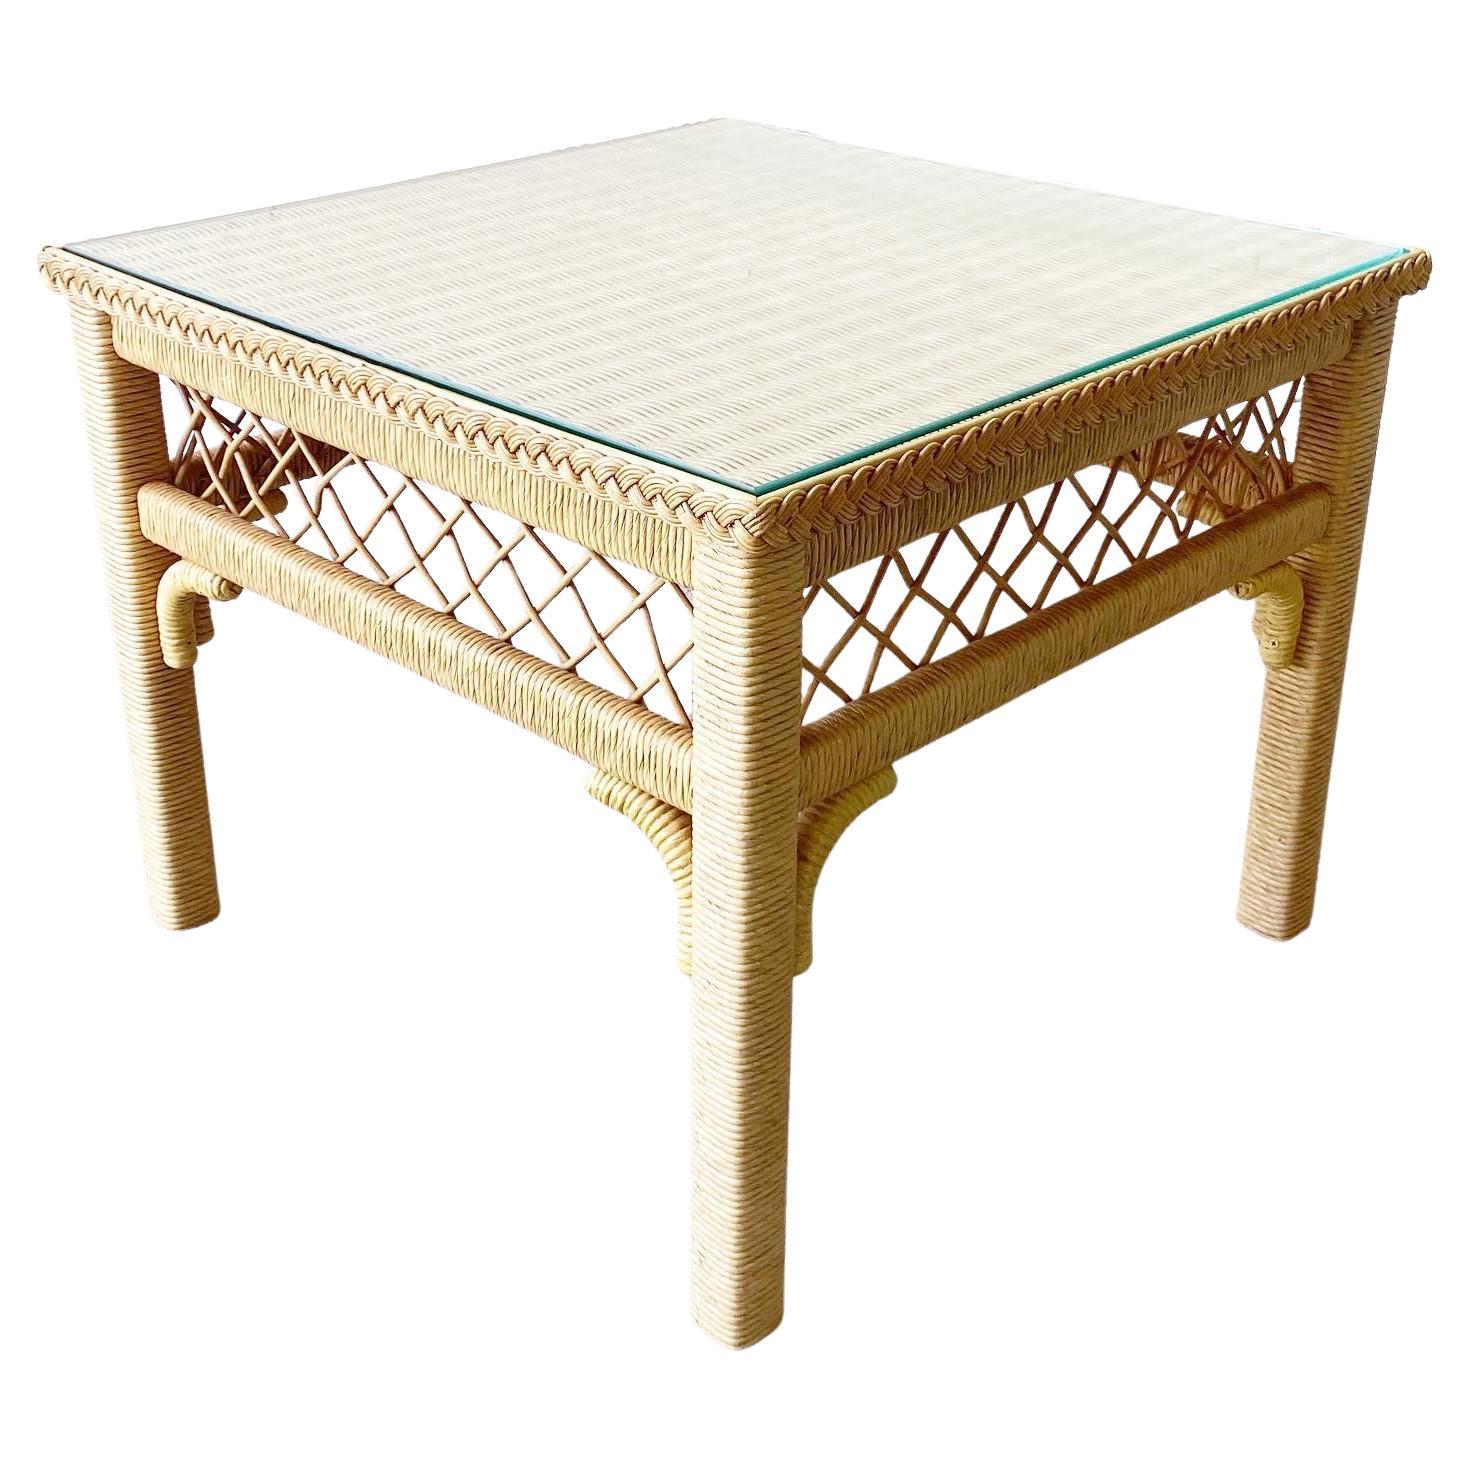 Boho Chic Henry Link Wicker Glass Top Side Table